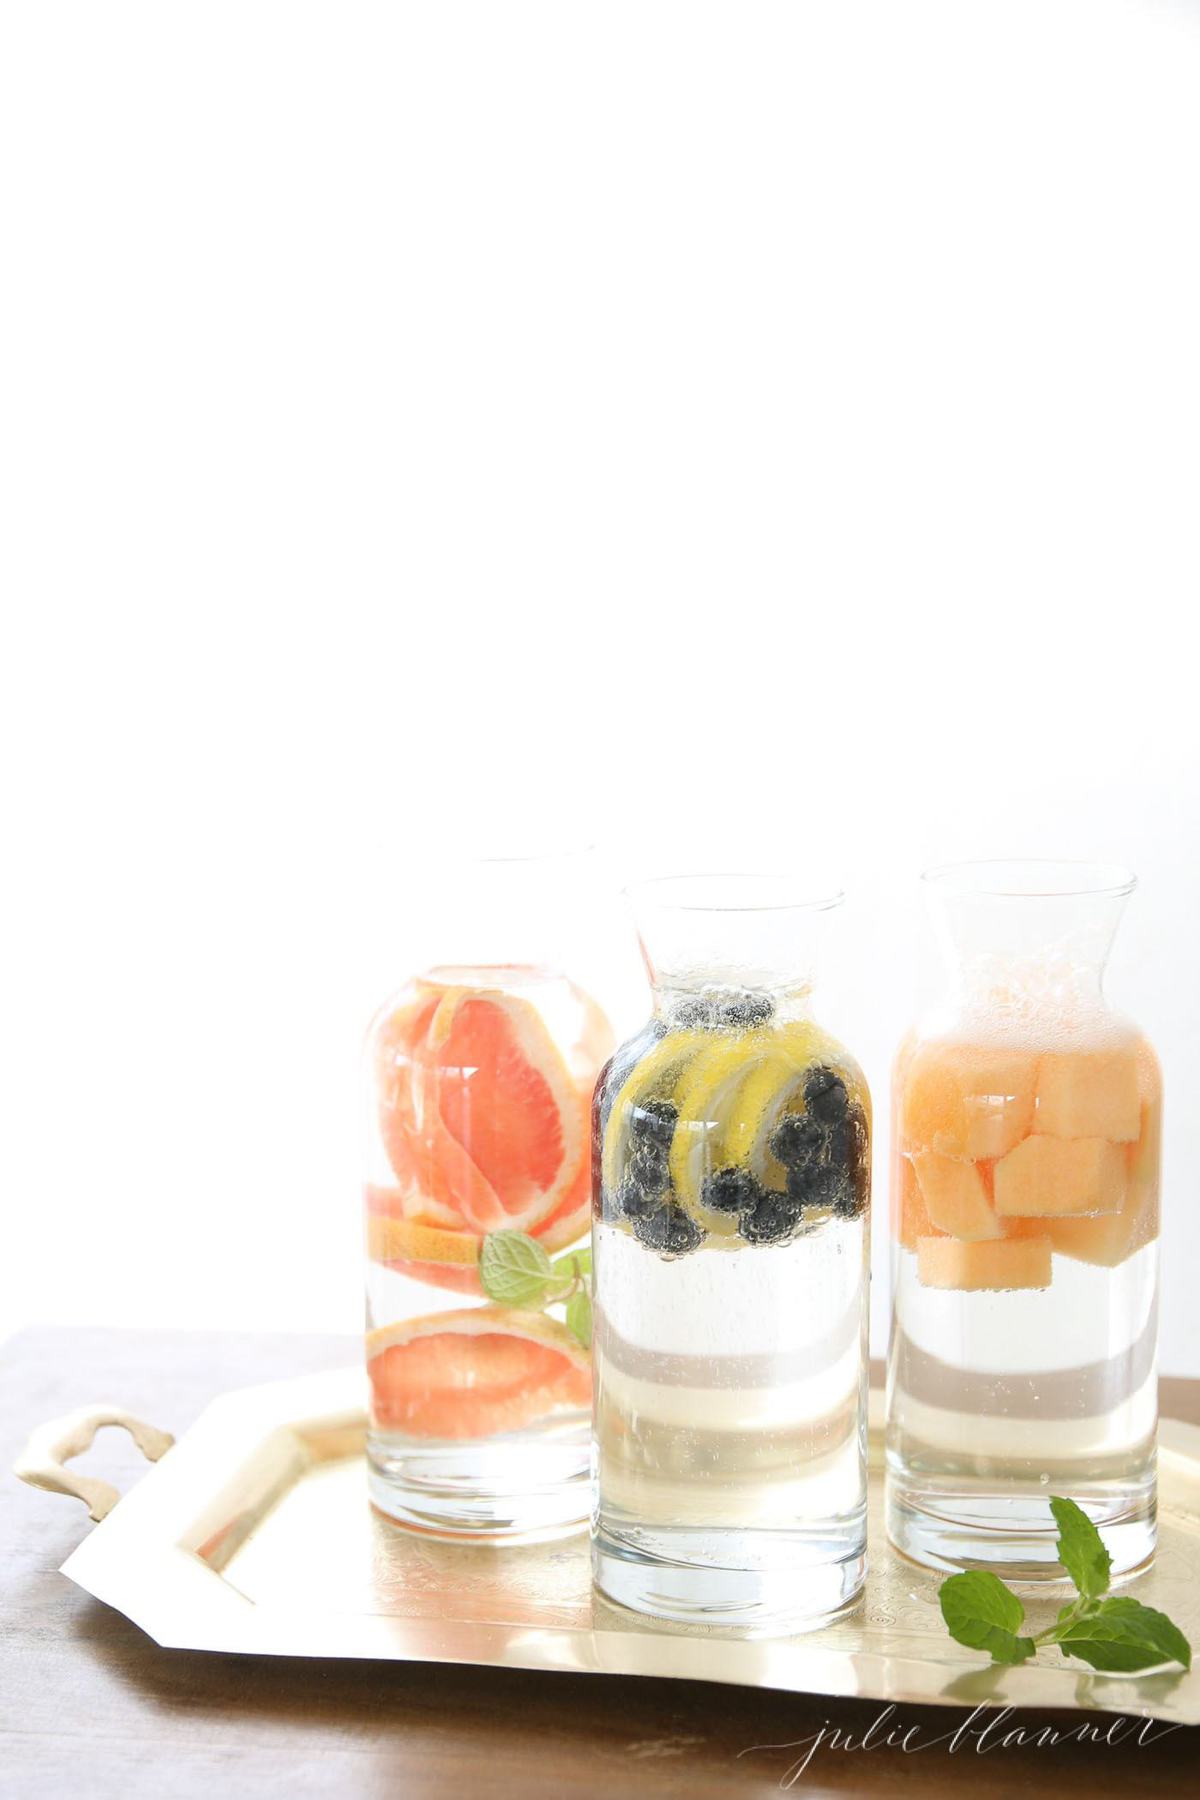 Three glass carafes on a tray, filled with various fruit infused water recipes.